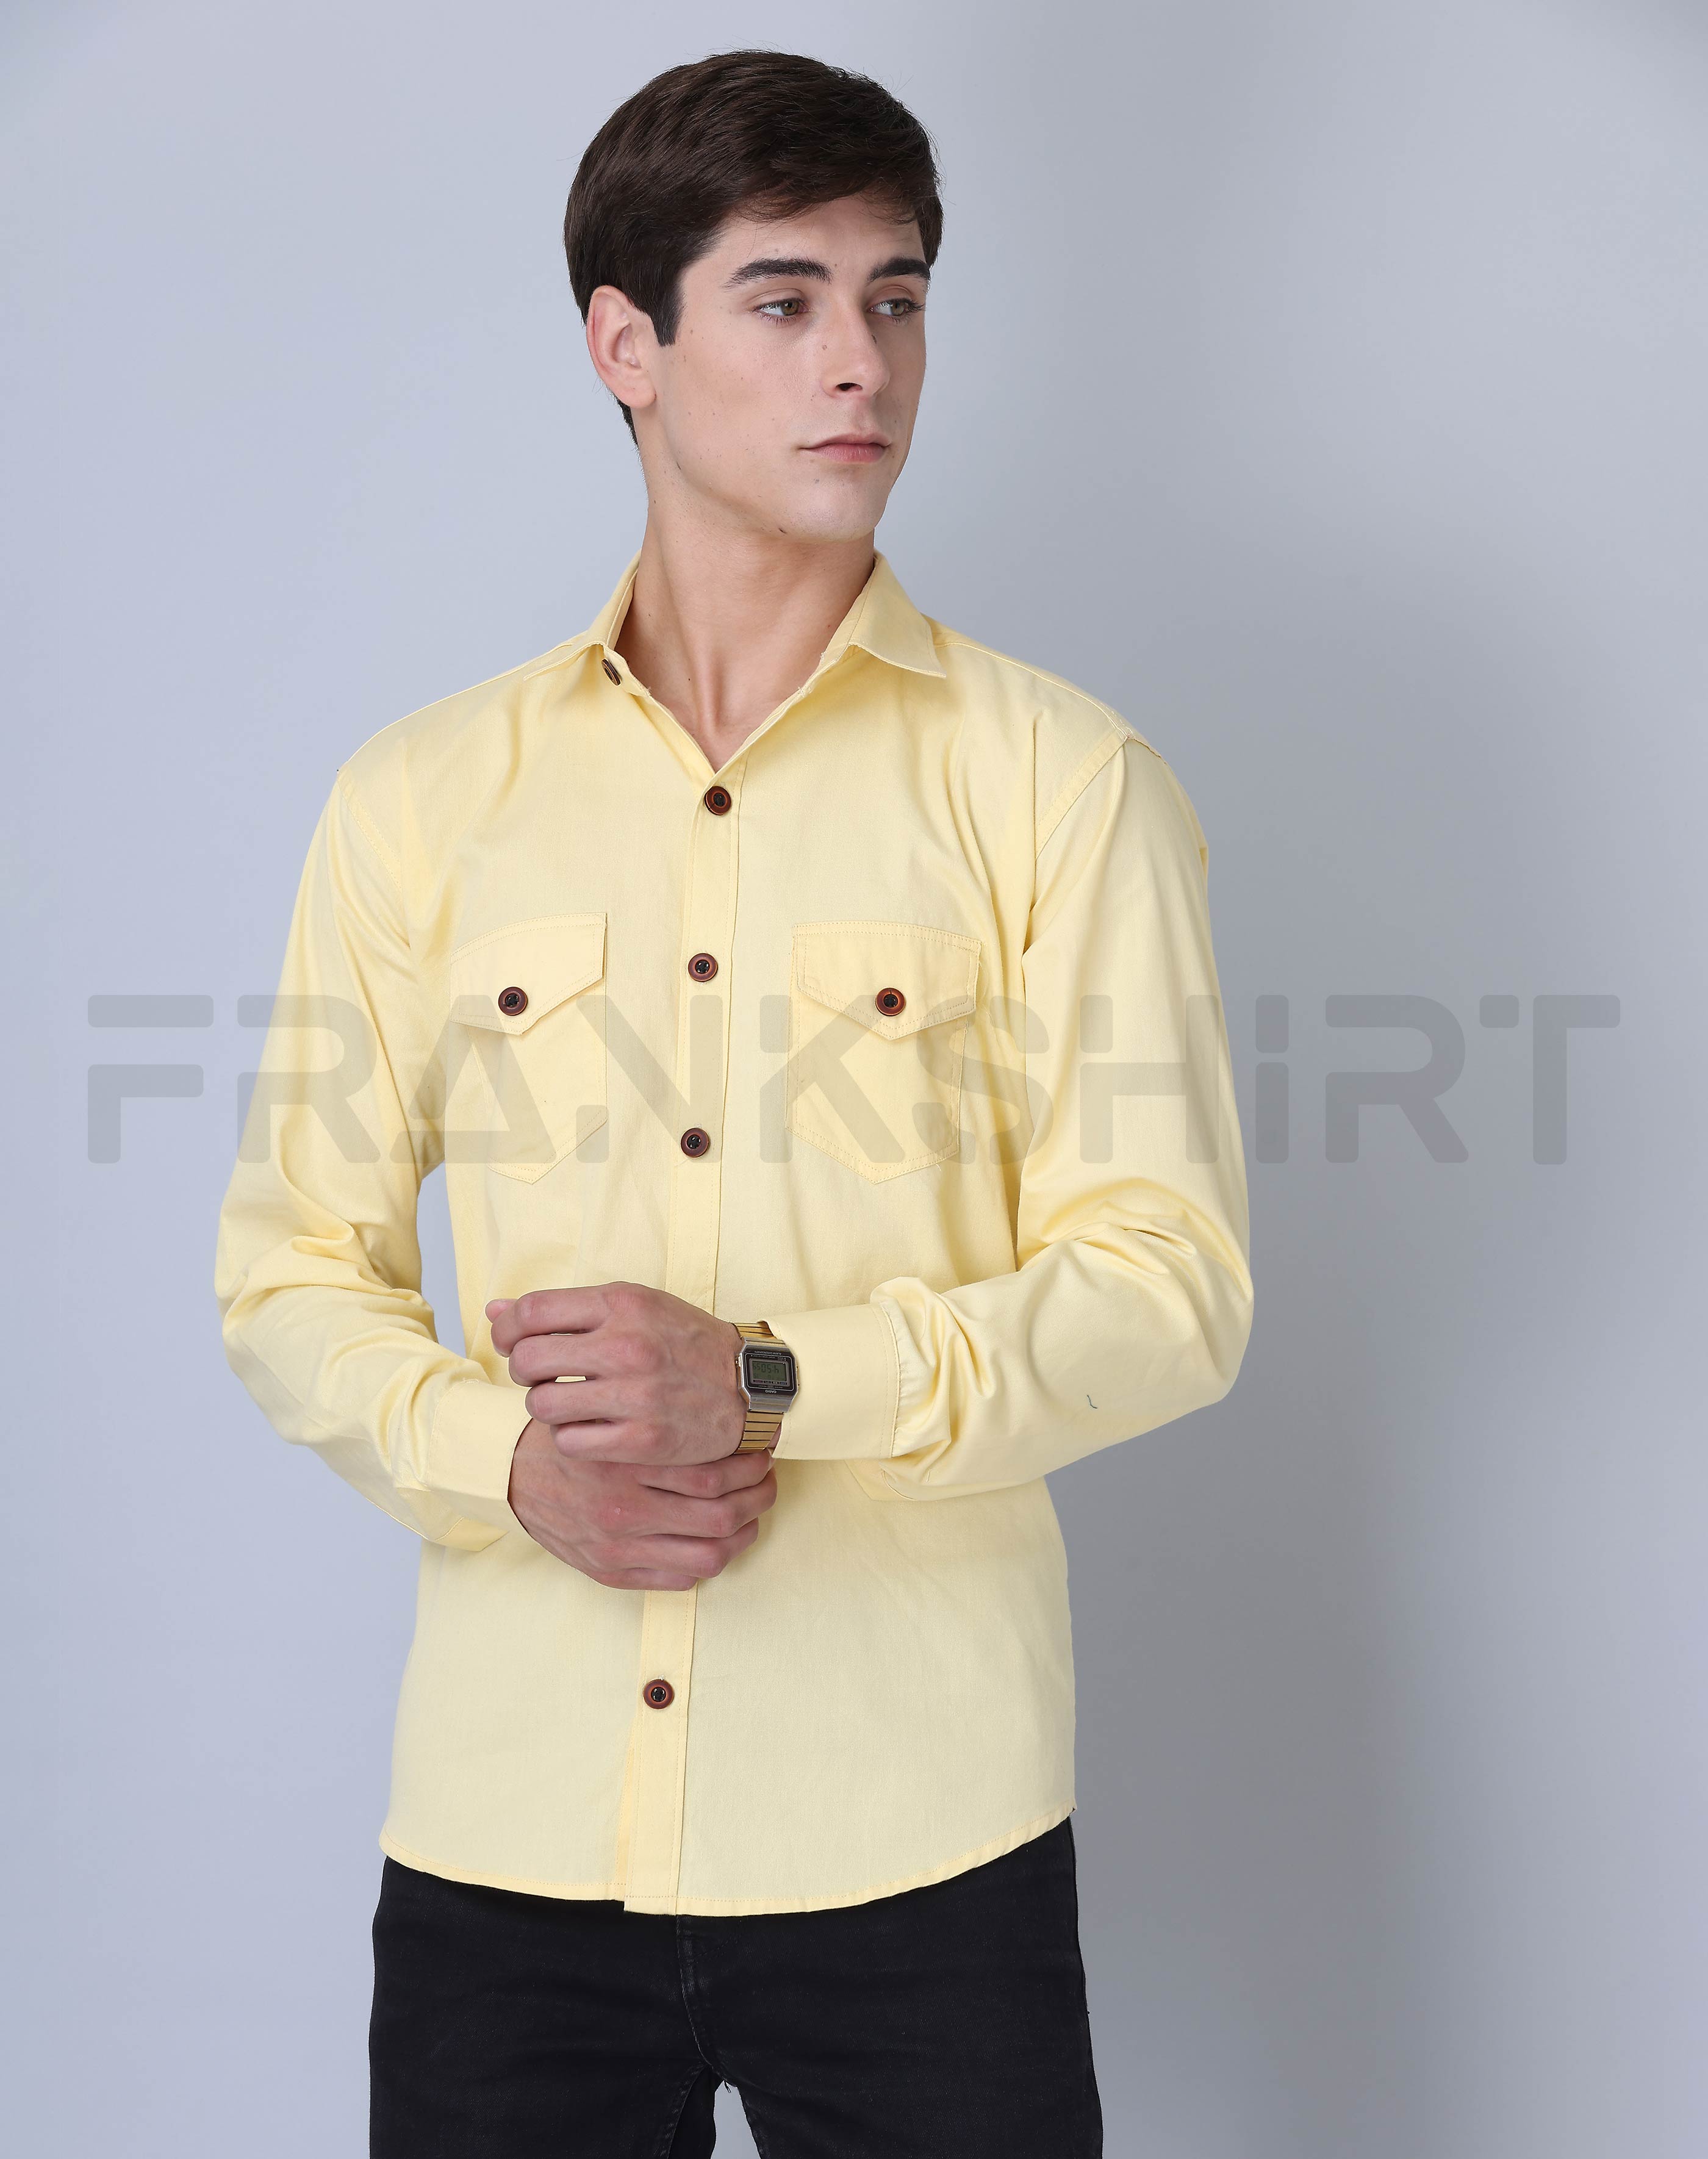 Frankshirt Double Pocket Yellow Solid Tailored Fit Cotton Casual Shirt for Man